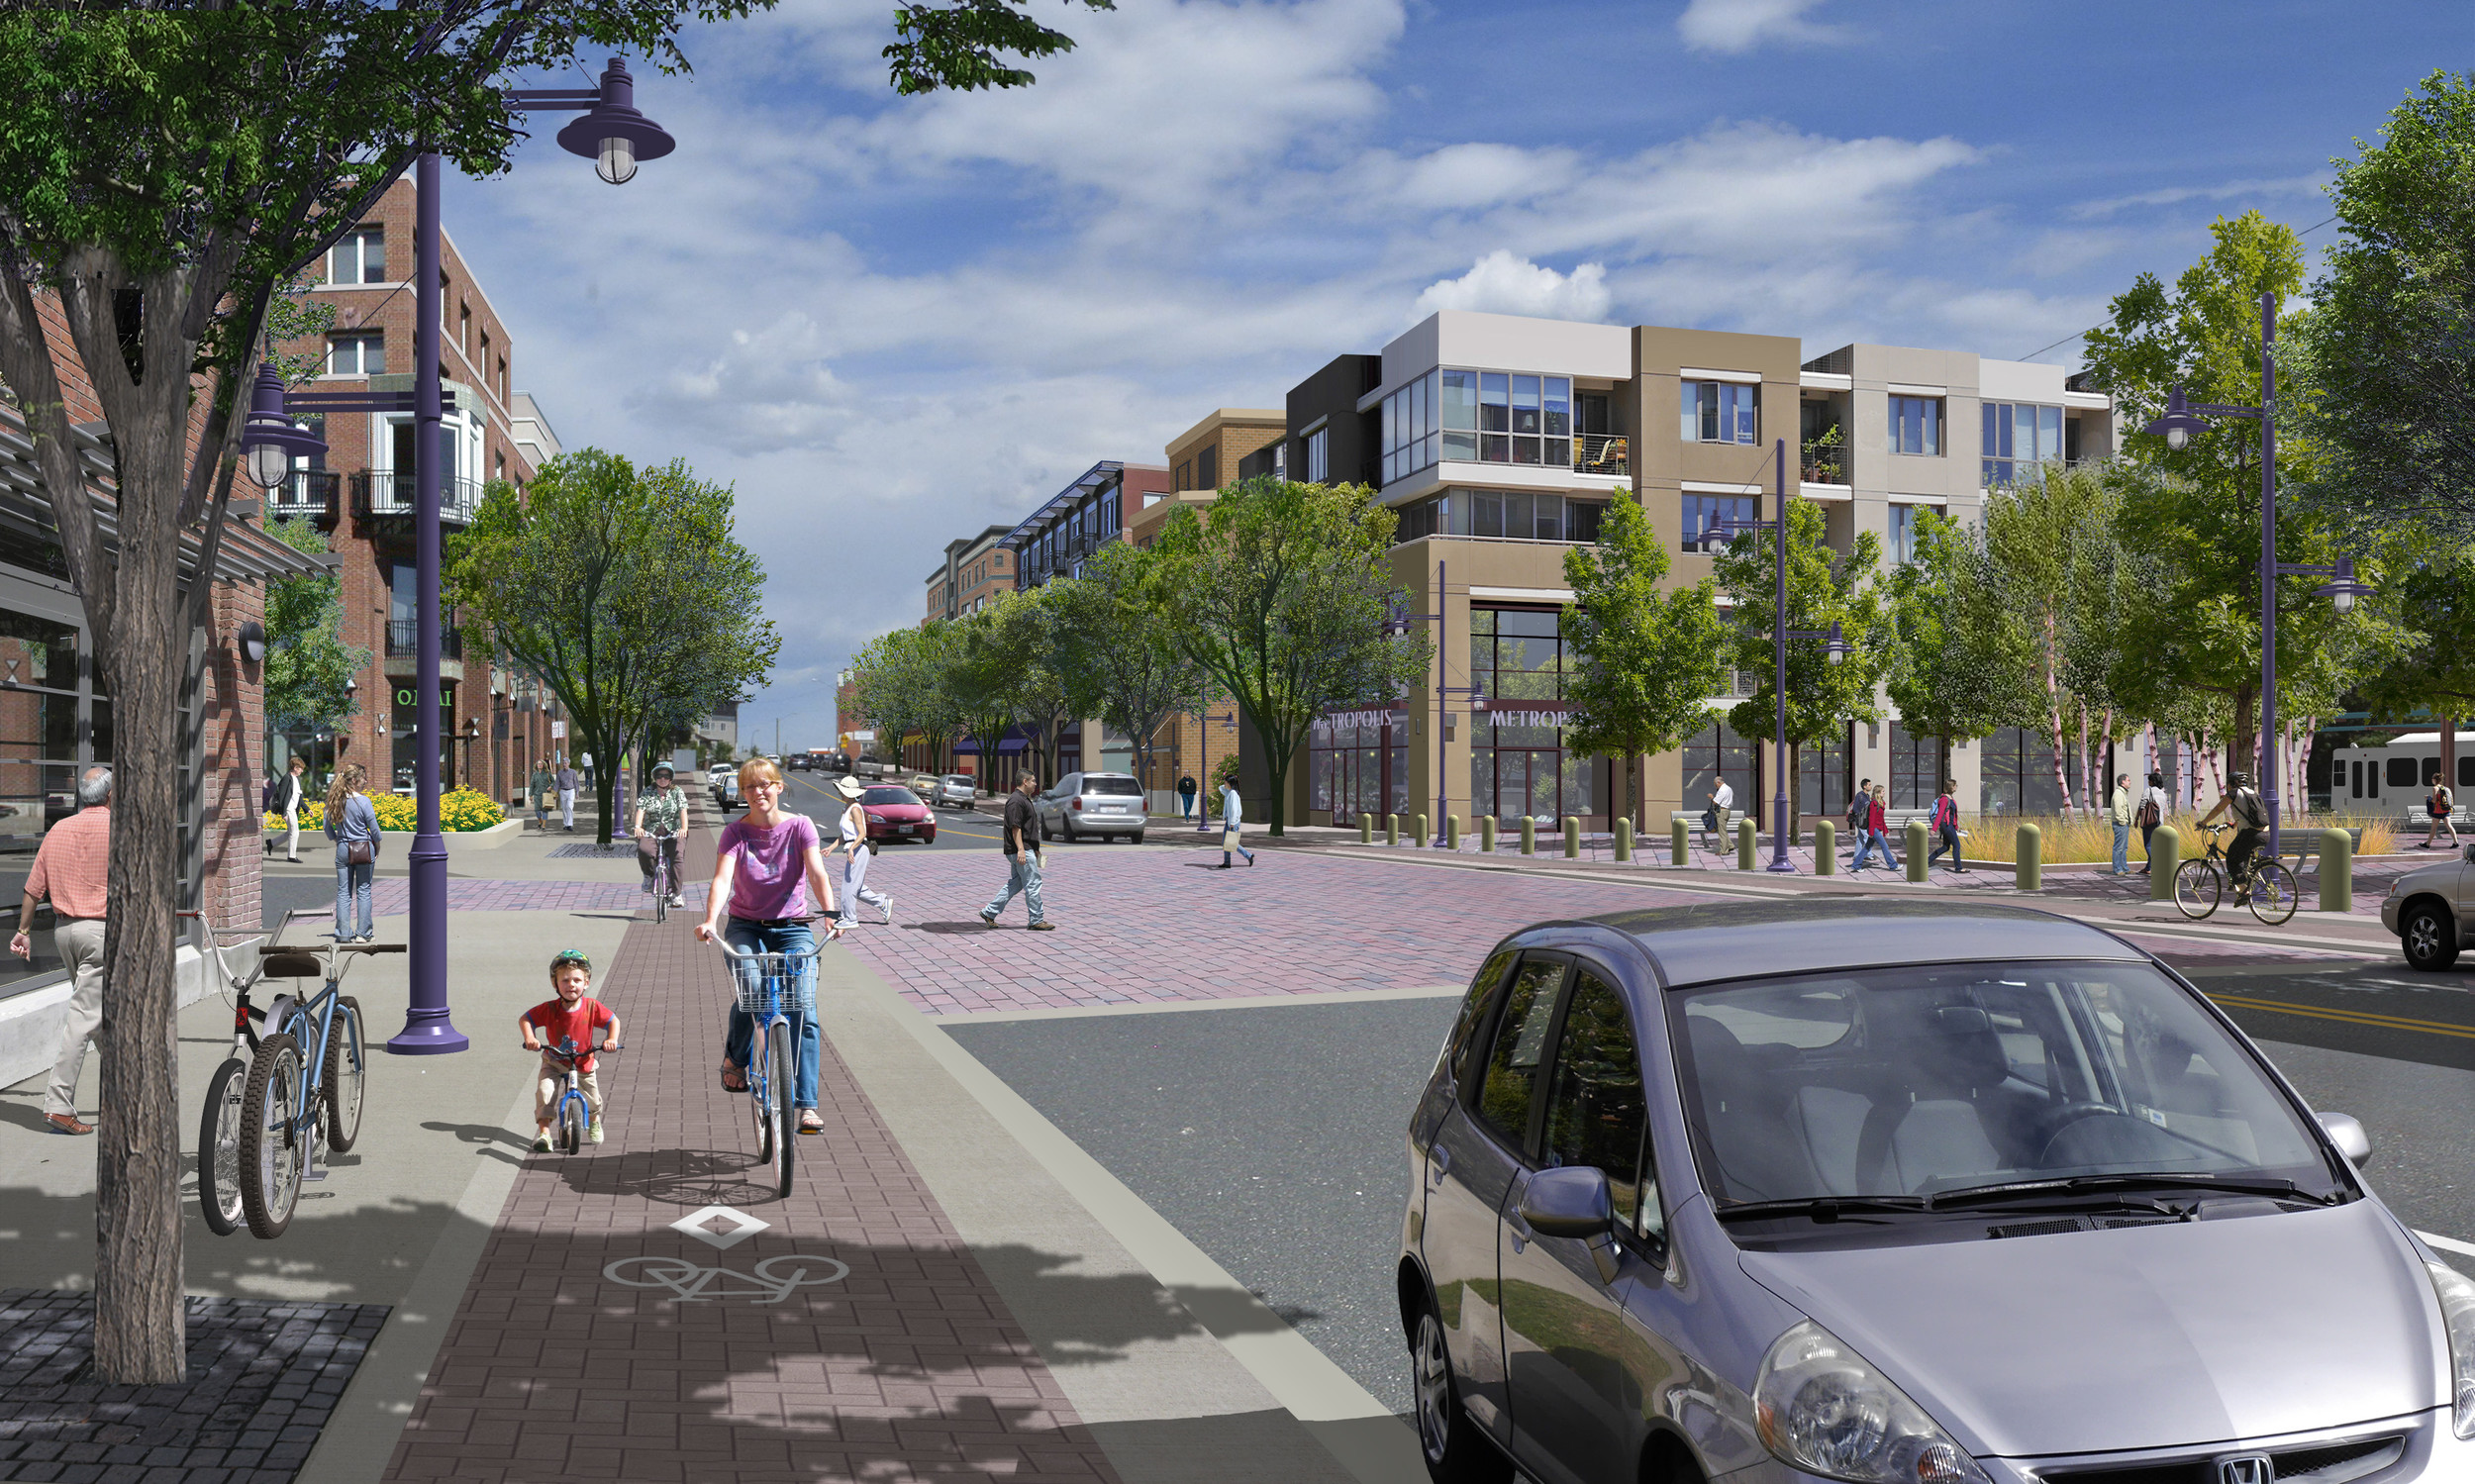 An example of mixed-use development could include designated bike lanes and added greenery.